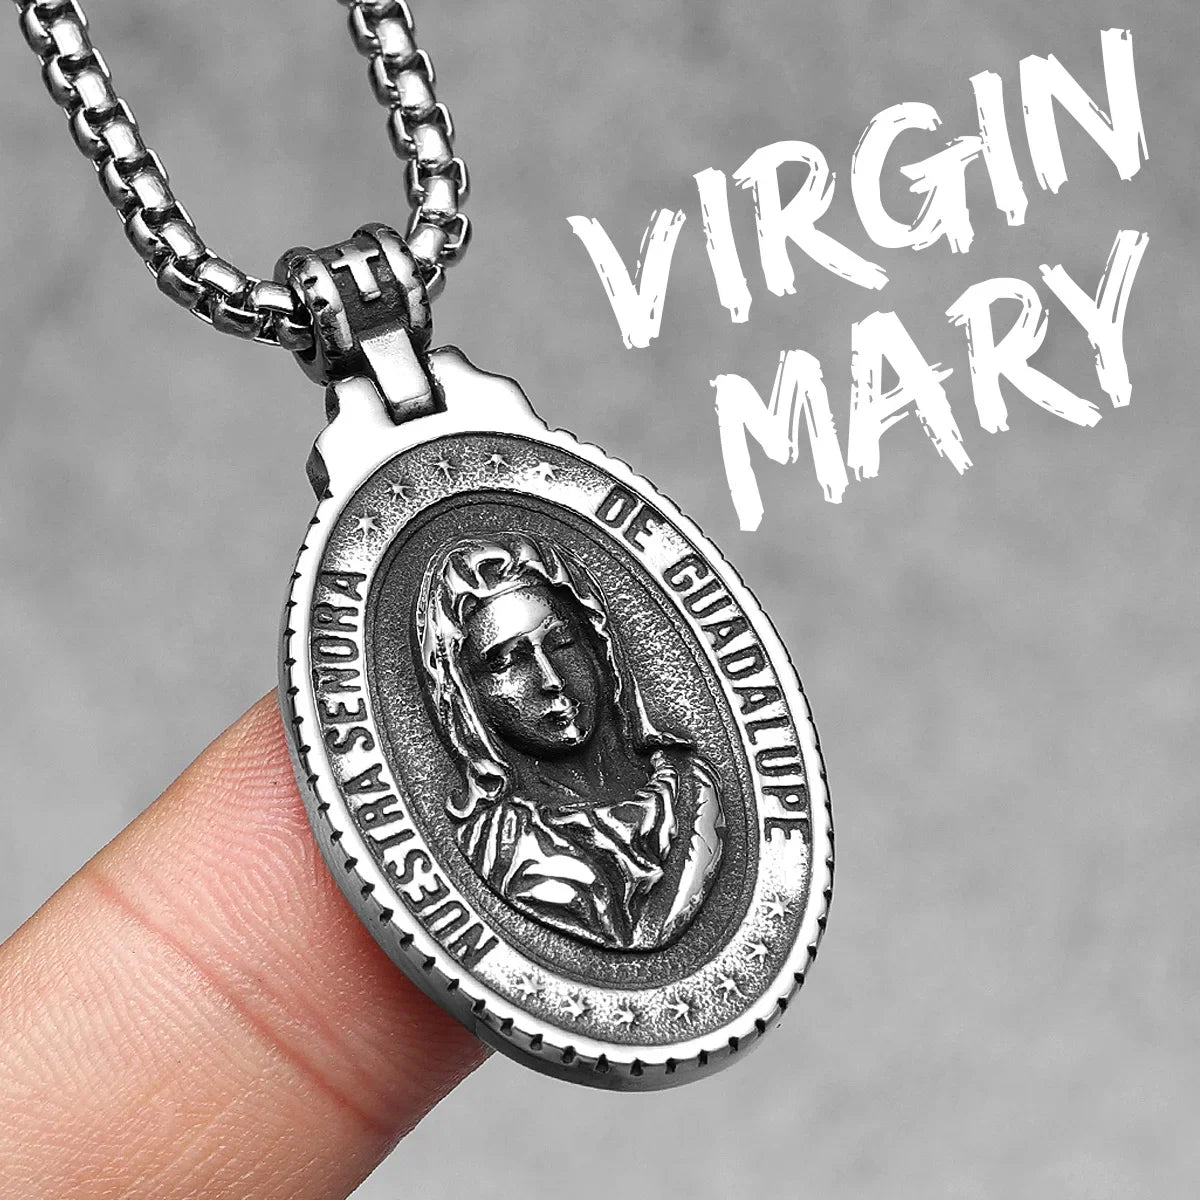 Virgin Mary Guadalupe Angel Cross Stainless Steel Men Necklaces Pendant Chain Amulet For Women Fashion Jewelry Gifts Virgin Mary-F-S